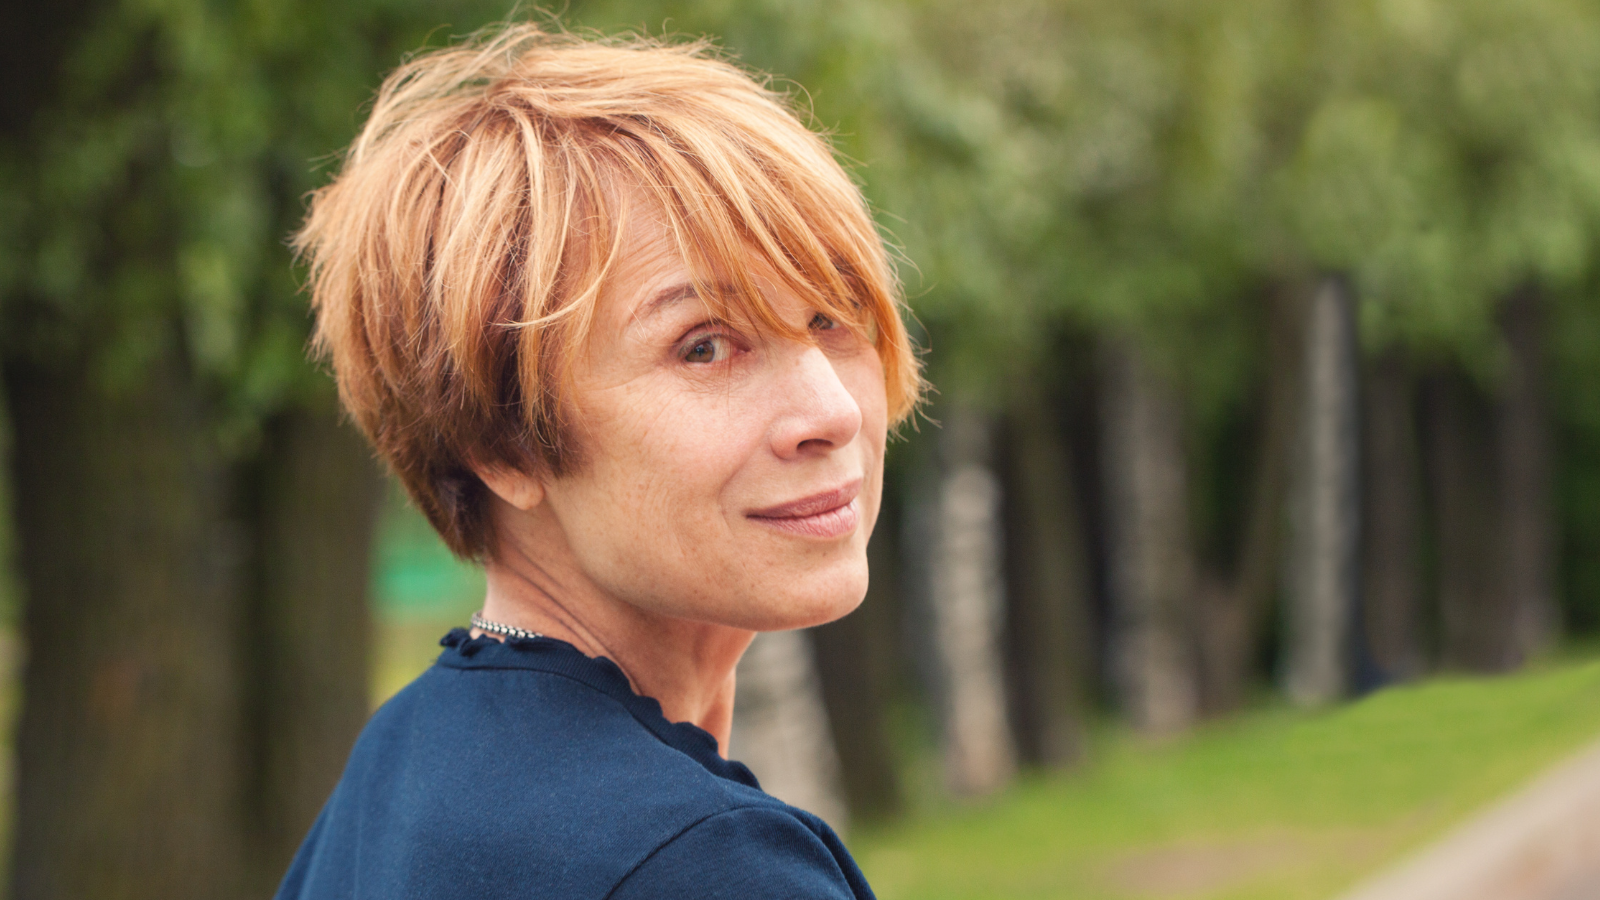 17 Haircuts That Look Great on Women Over 50